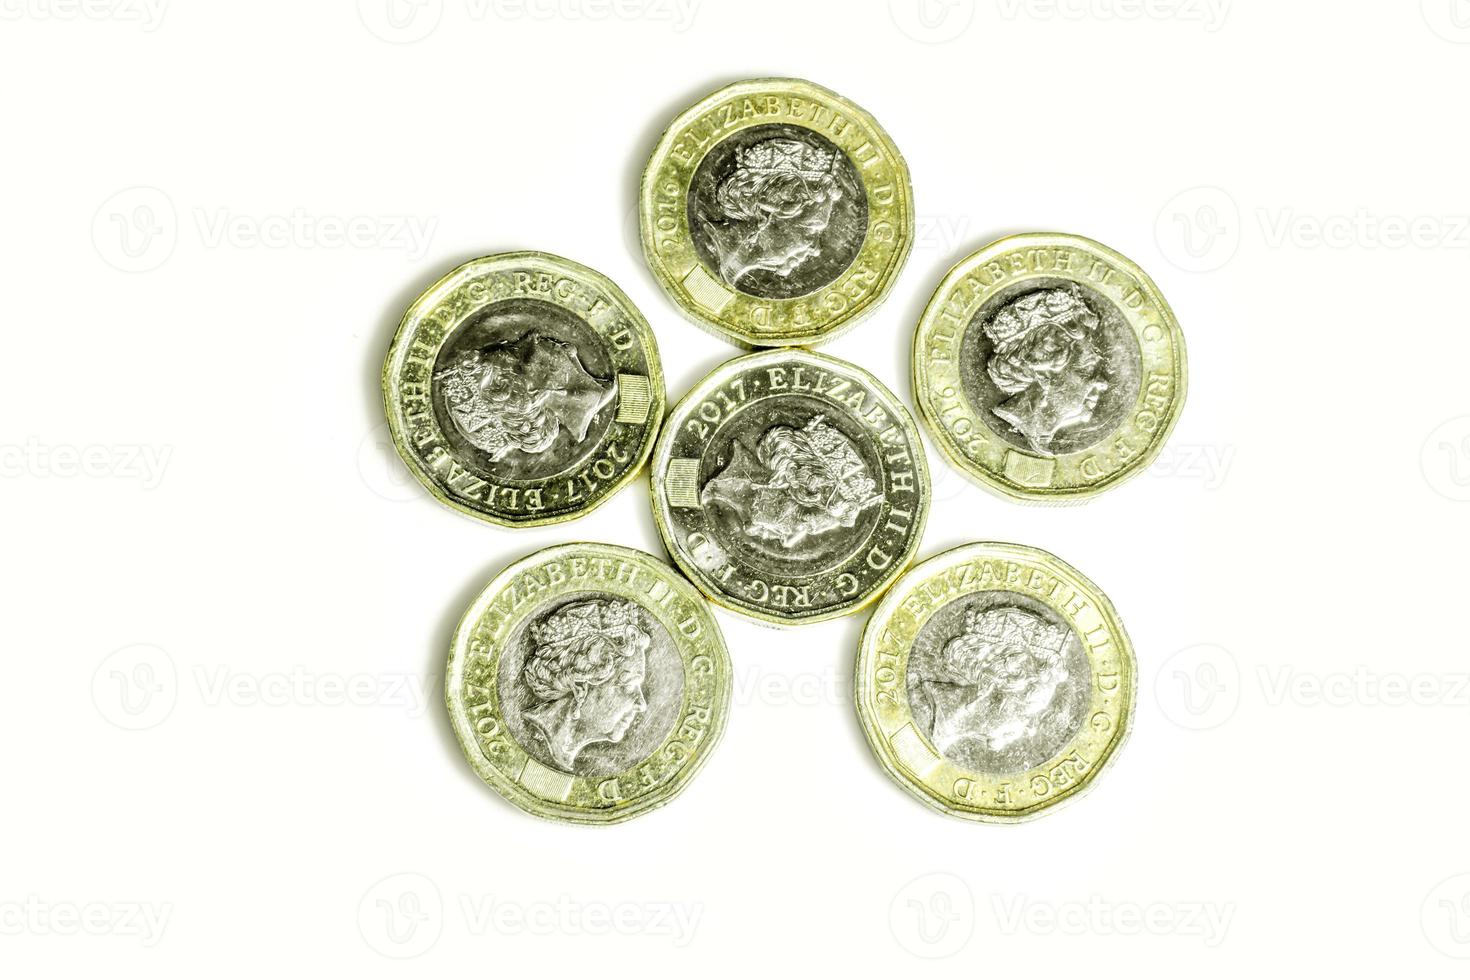 British currency the new one pounds coins put on look like a star picture isolate on white background. photo